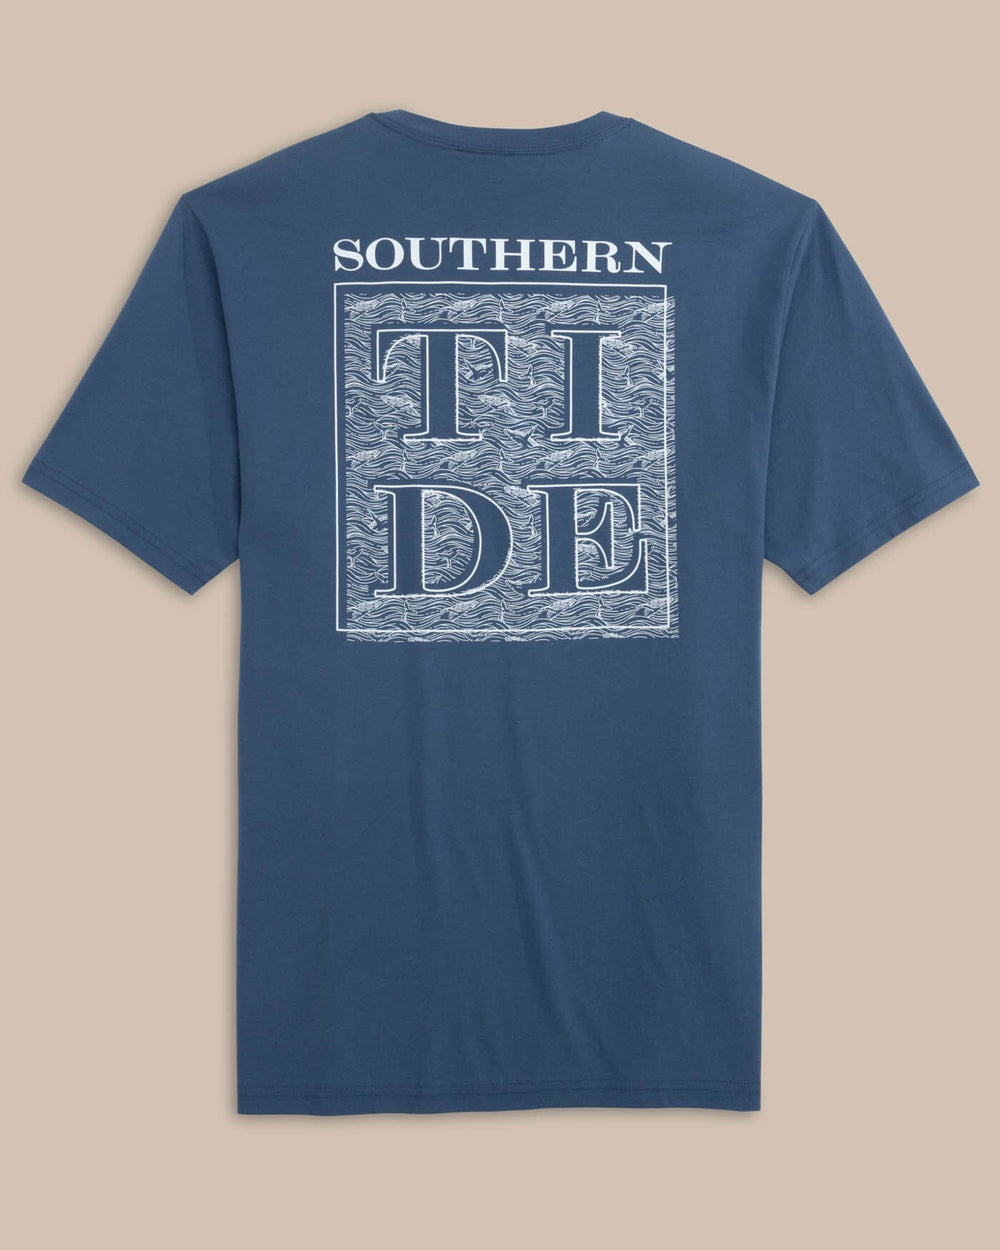 The back view of the Southern Tide The Whaler Short Sleeve T-shirt by Southern Tide - Aged Denim